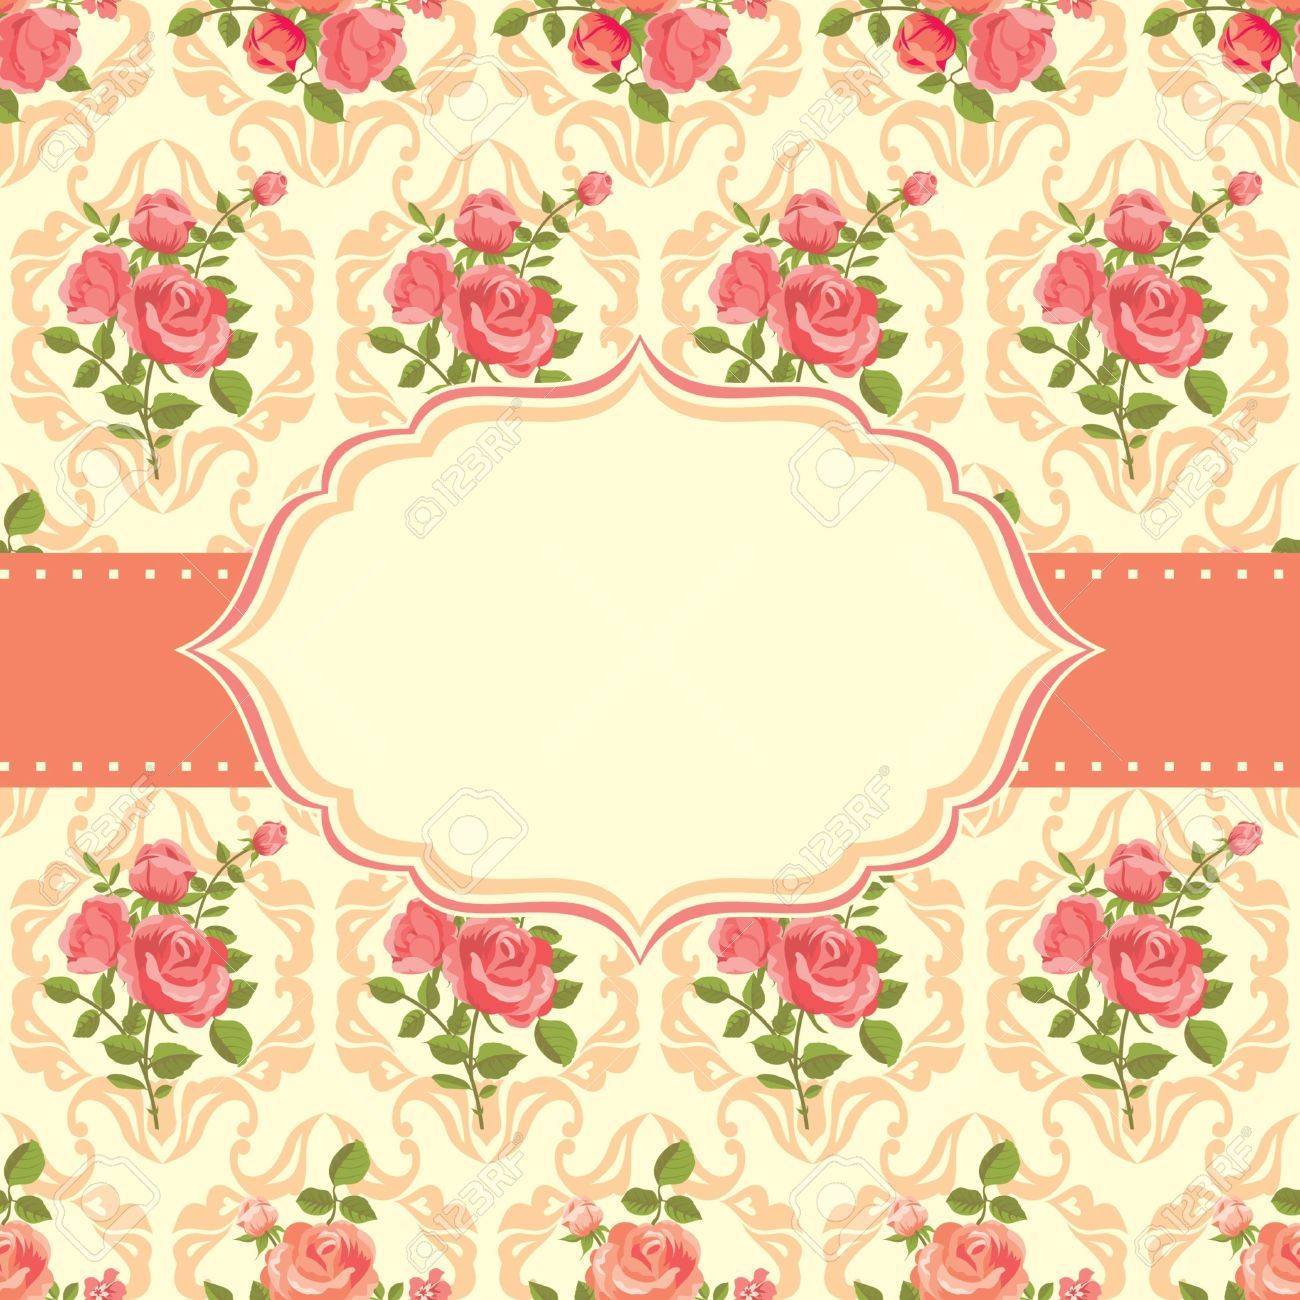 Background clipart vintage. Card romantic with roses